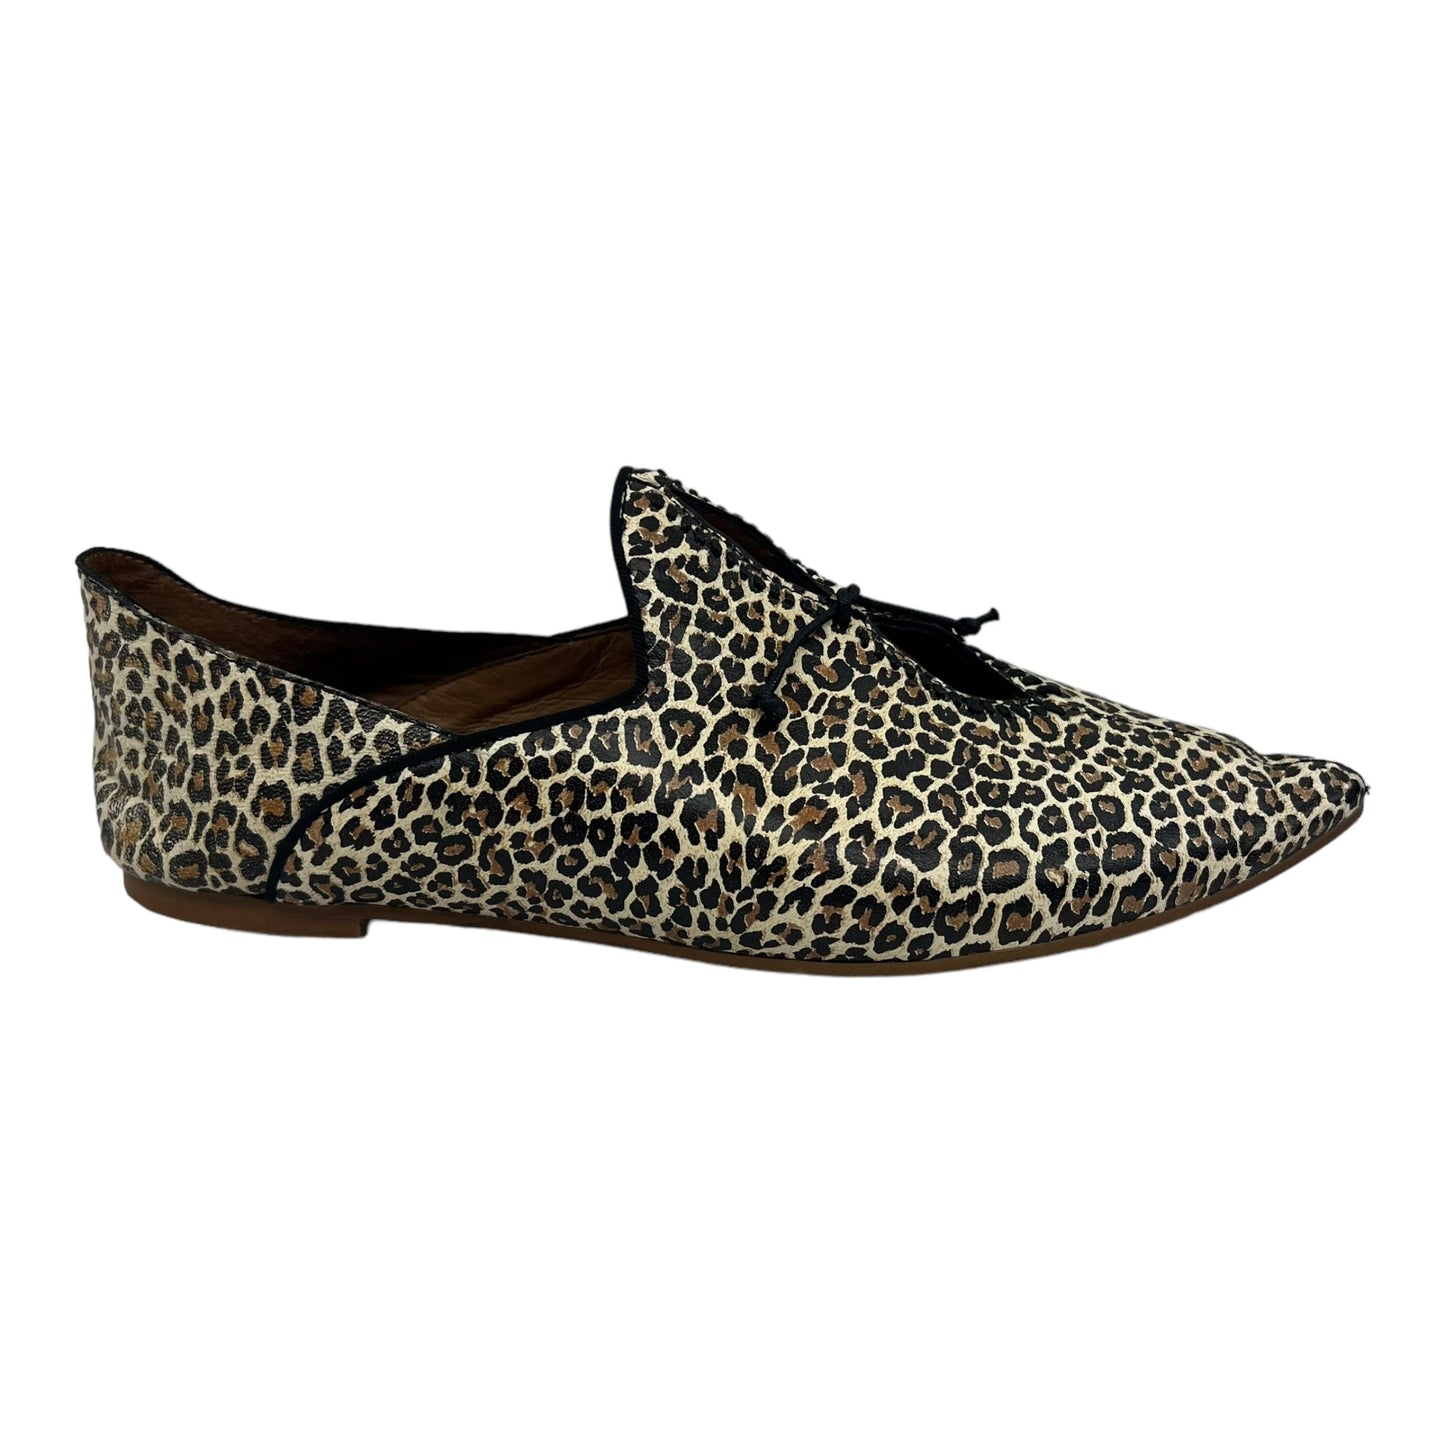 Animal Print Shoes Flats Free People, Size 7.5